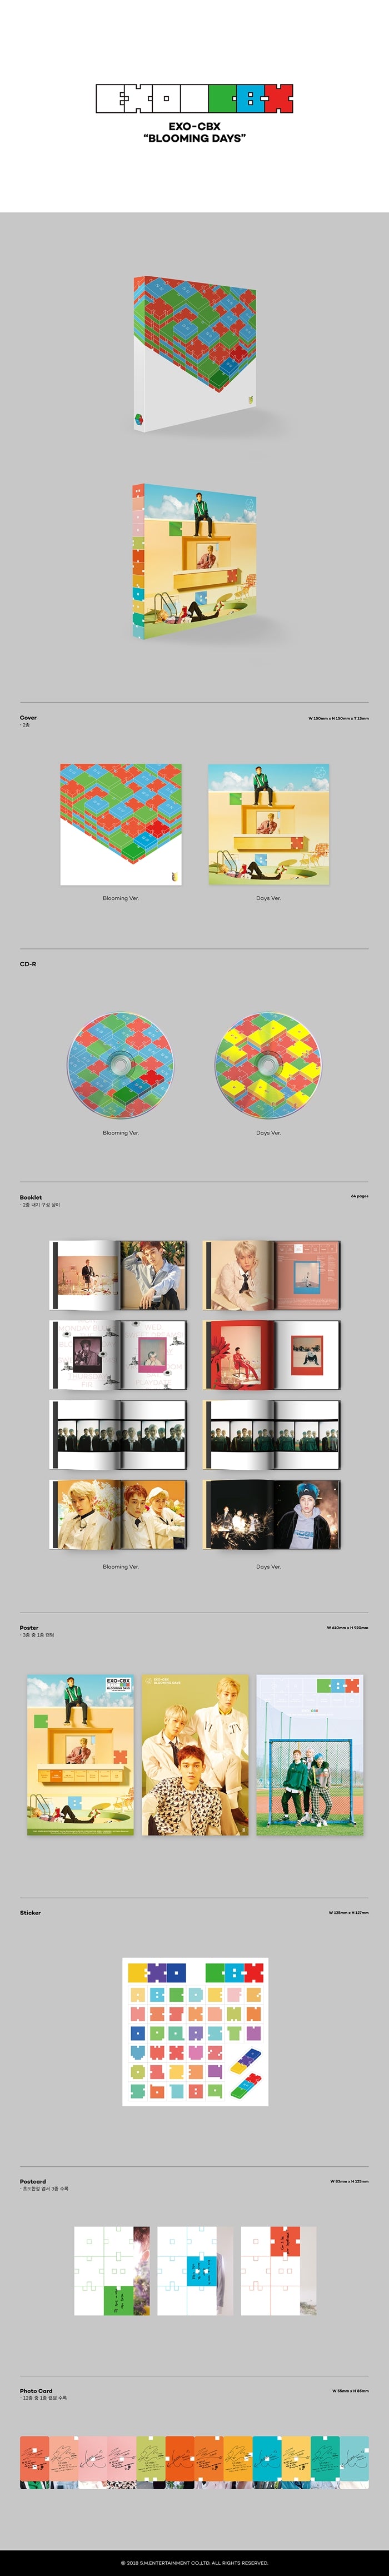 1 CD
1 Booklet (64 pages)
1 Photo Card
1 Sticker